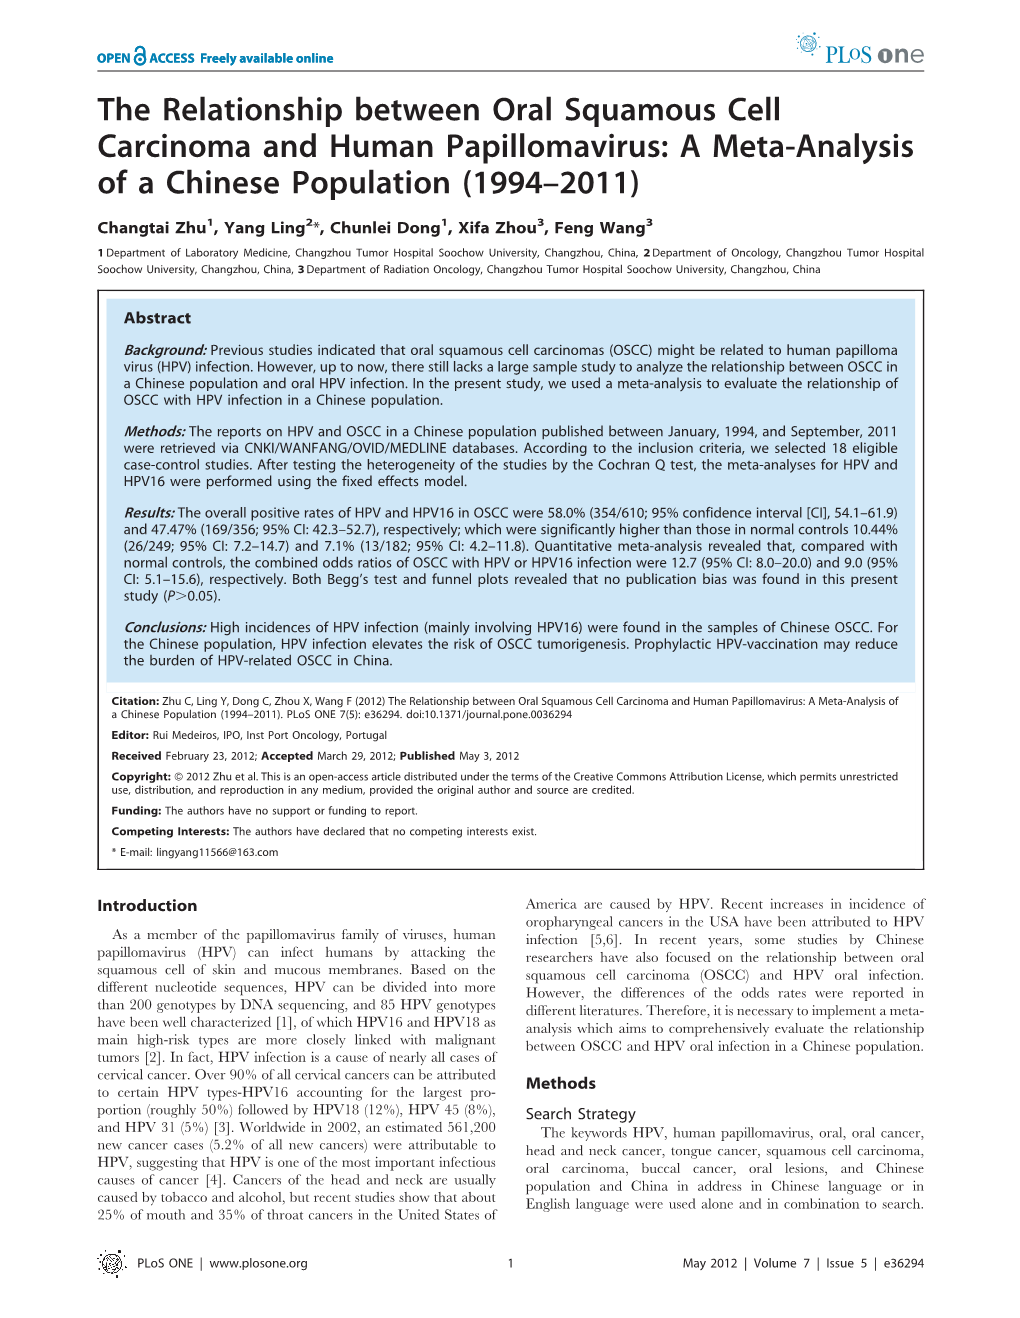 The Relationship Between Oral Squamous Cell Carcinoma and Human Papillomavirus: a Meta-Analysis of a Chinese Population (1994–2011)